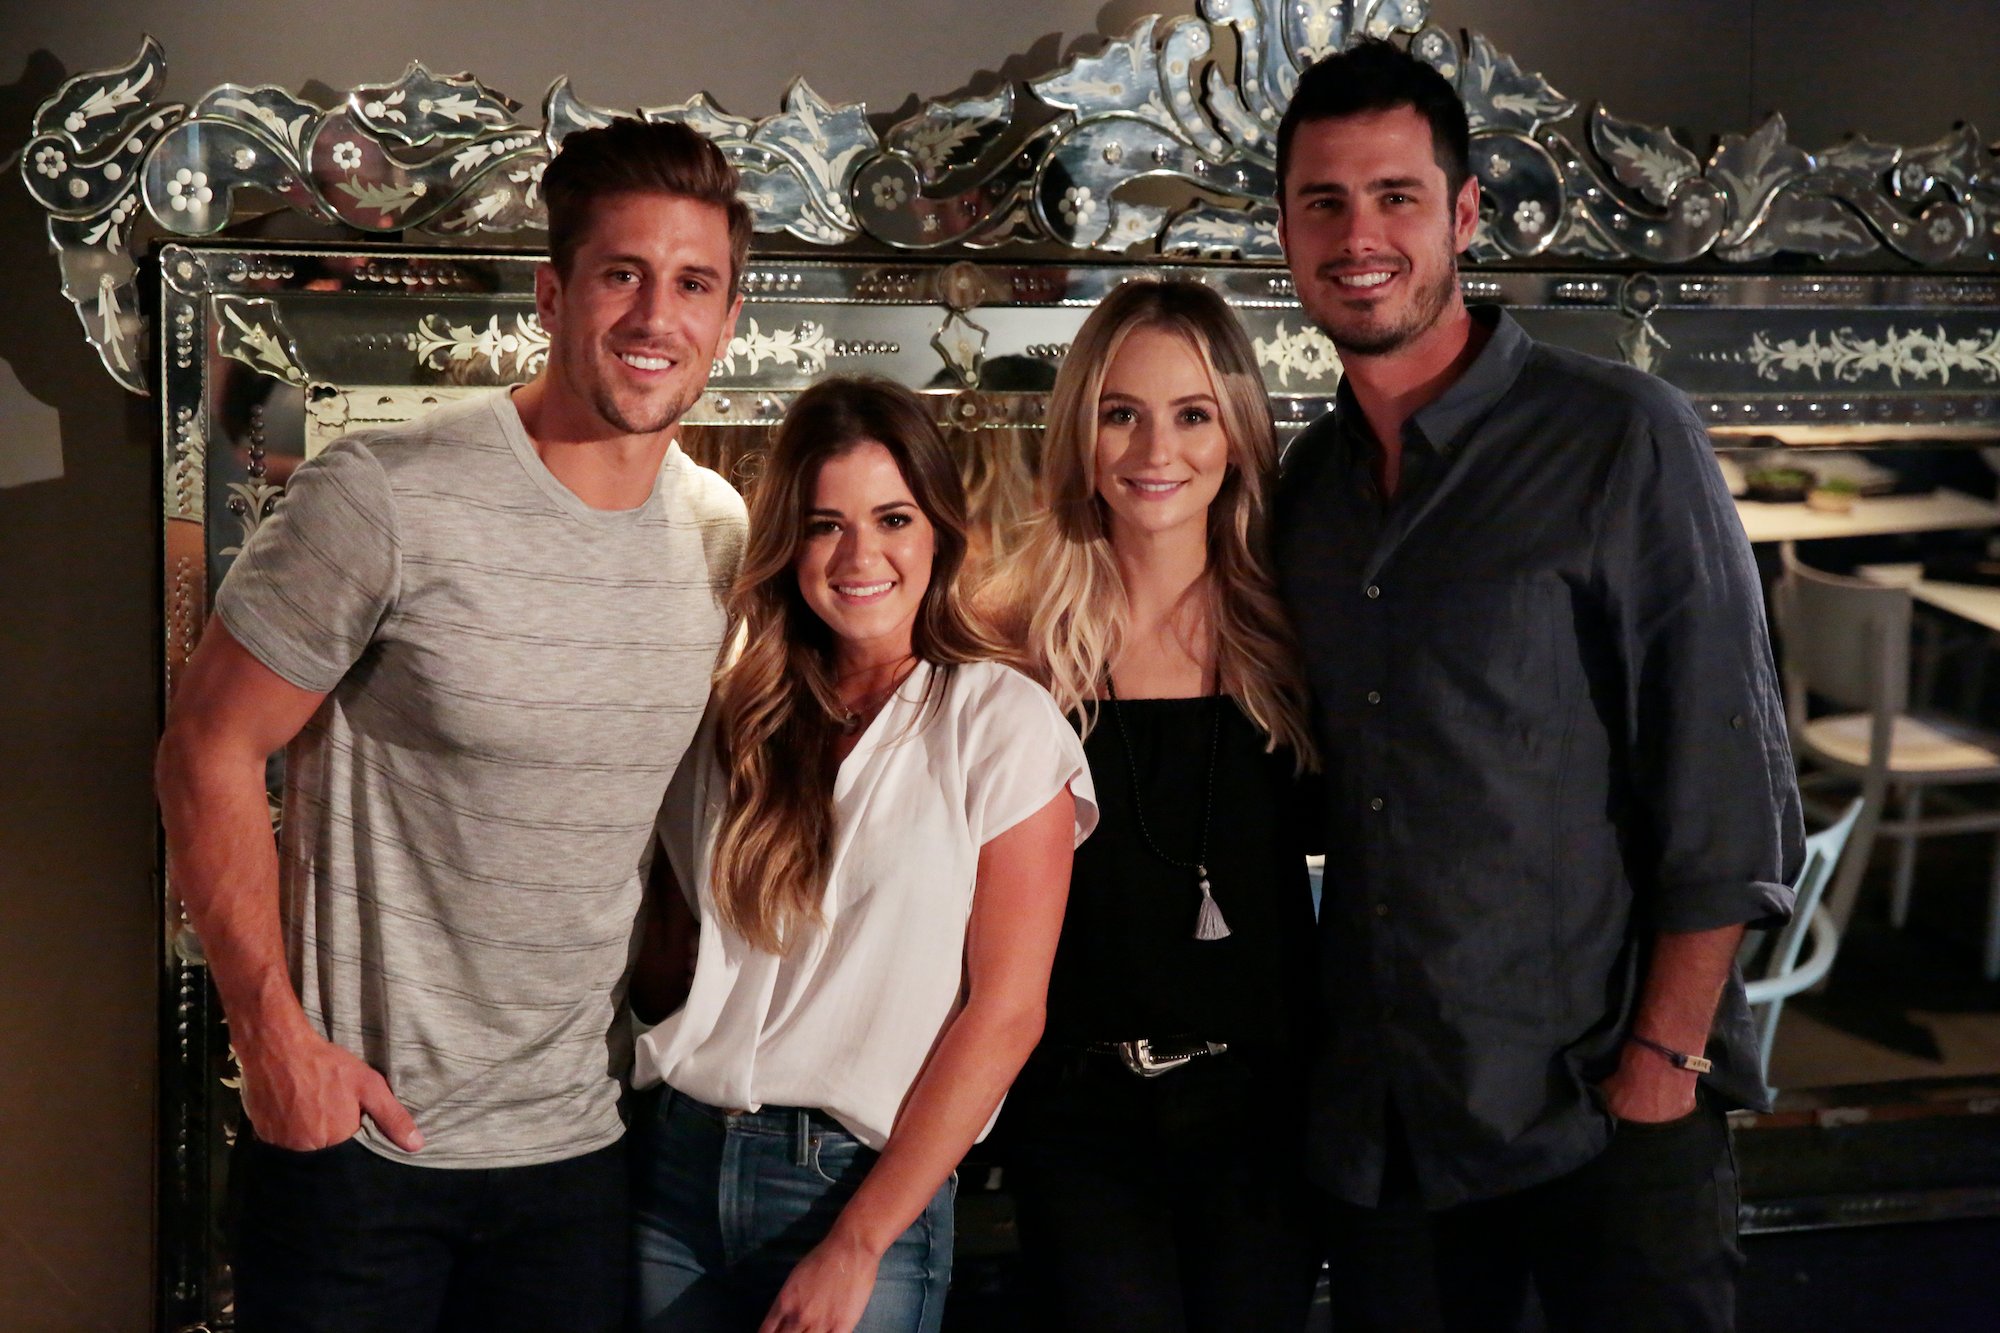 Ben Higgins made fans question is the bachelor not allowed to say 'I love you' after telling both JoJo Fletcher (Center Left) and Lauren Bushnell (Center Right) on his season of 'The Bachelor'